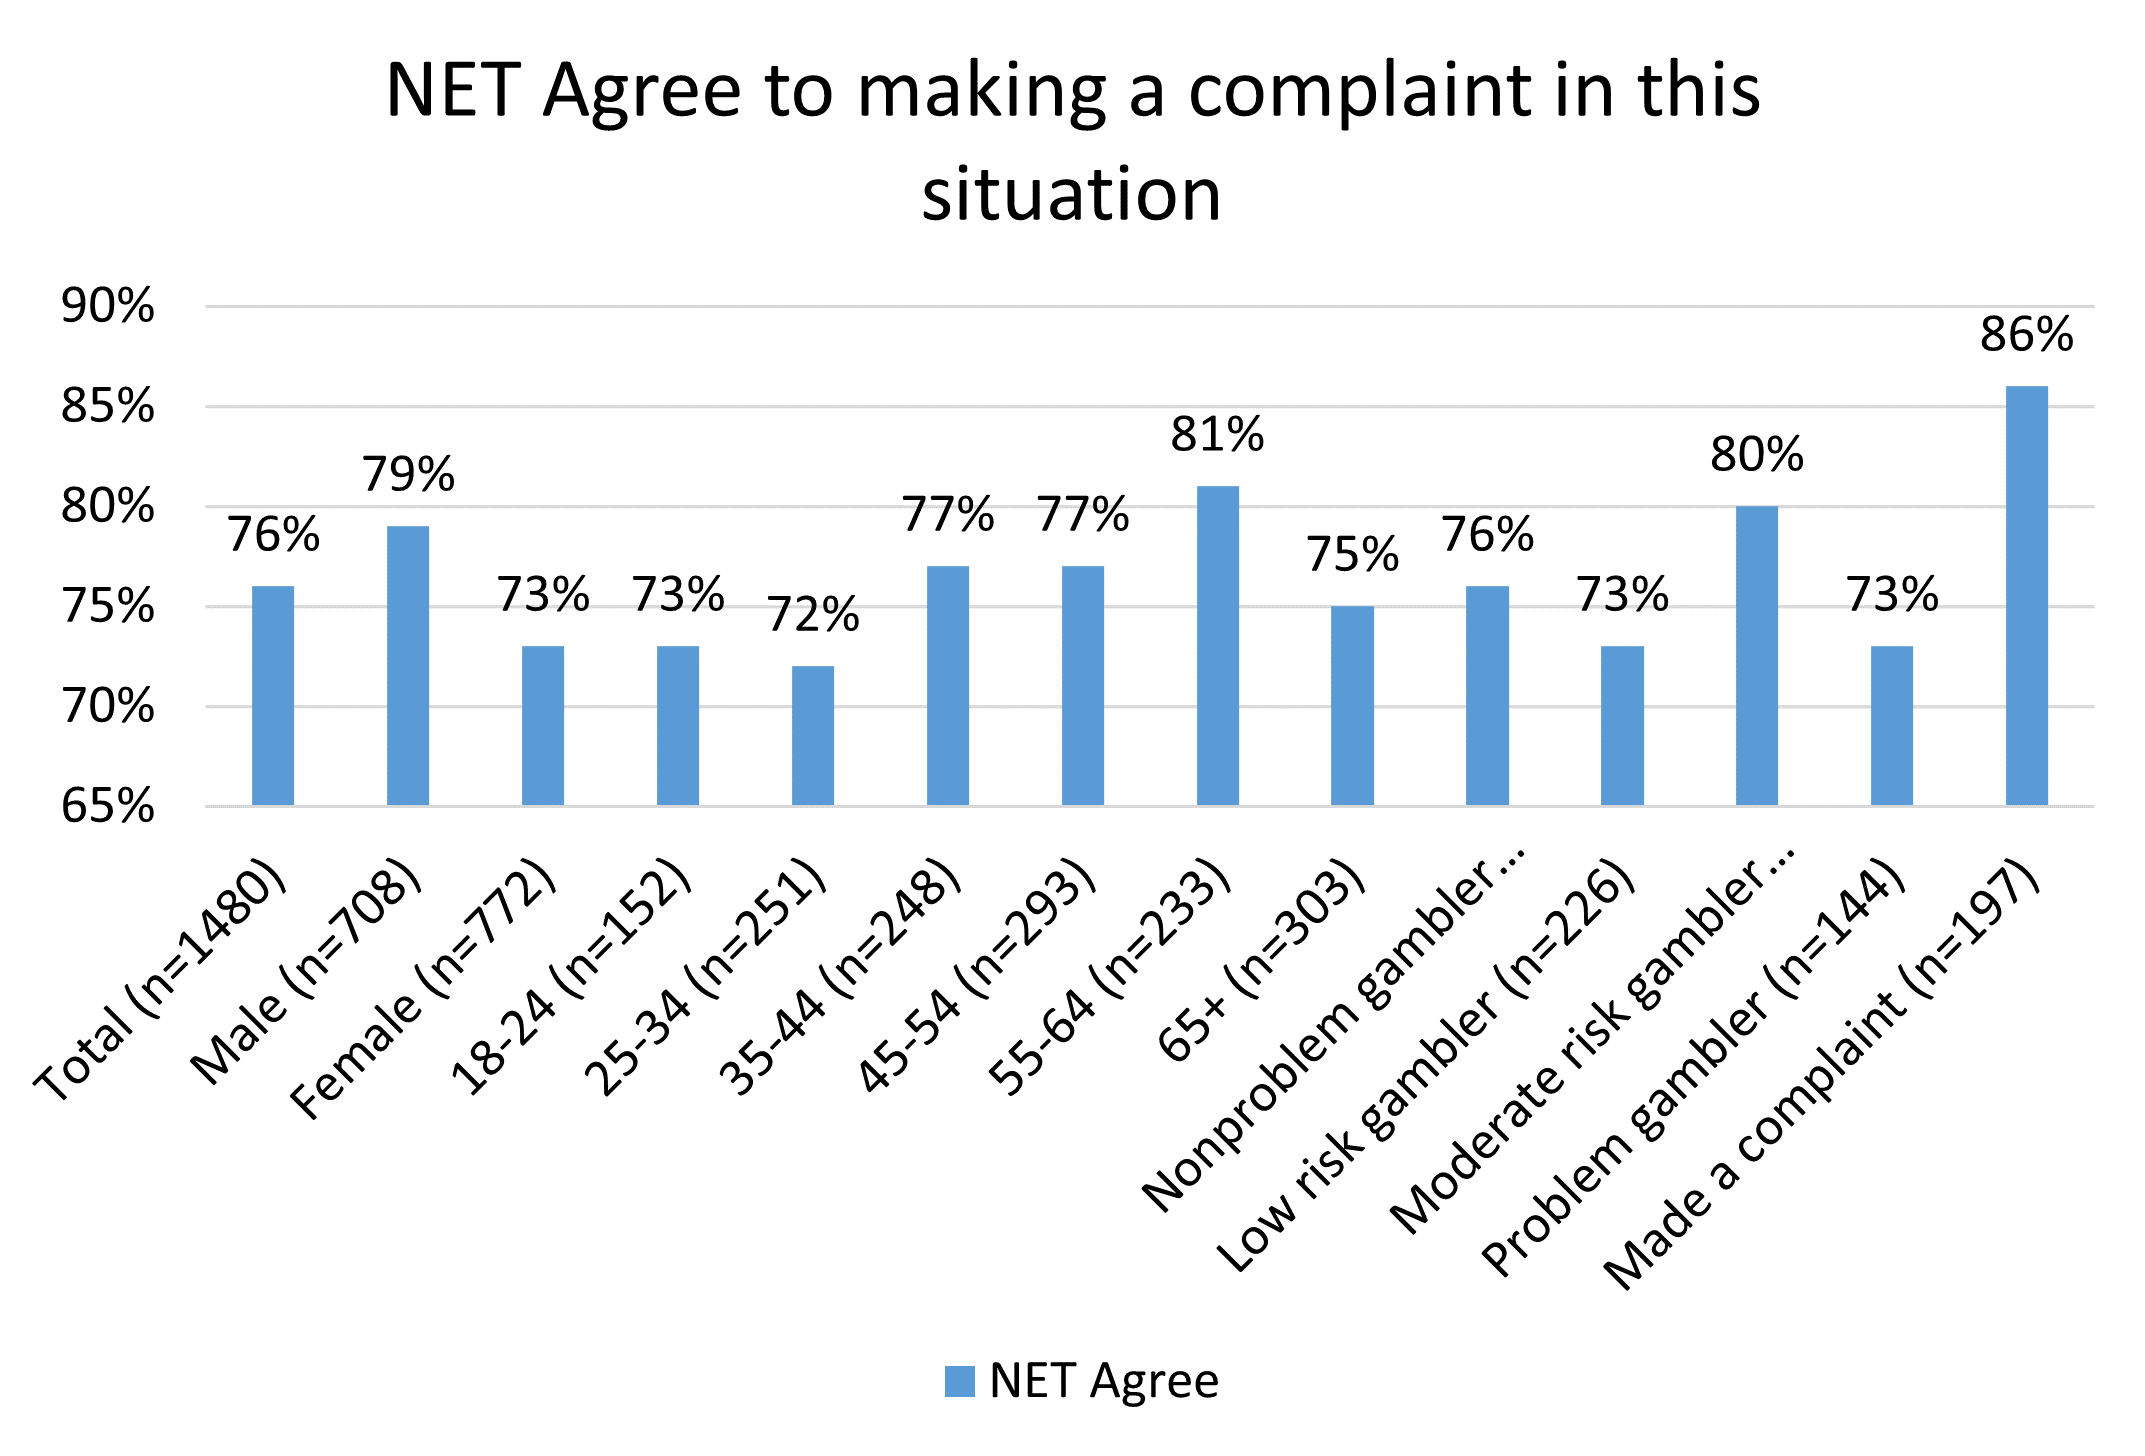 Agree to making a complaint in this situation scenario 2 - a bar chart made up of 14 vertical bars.